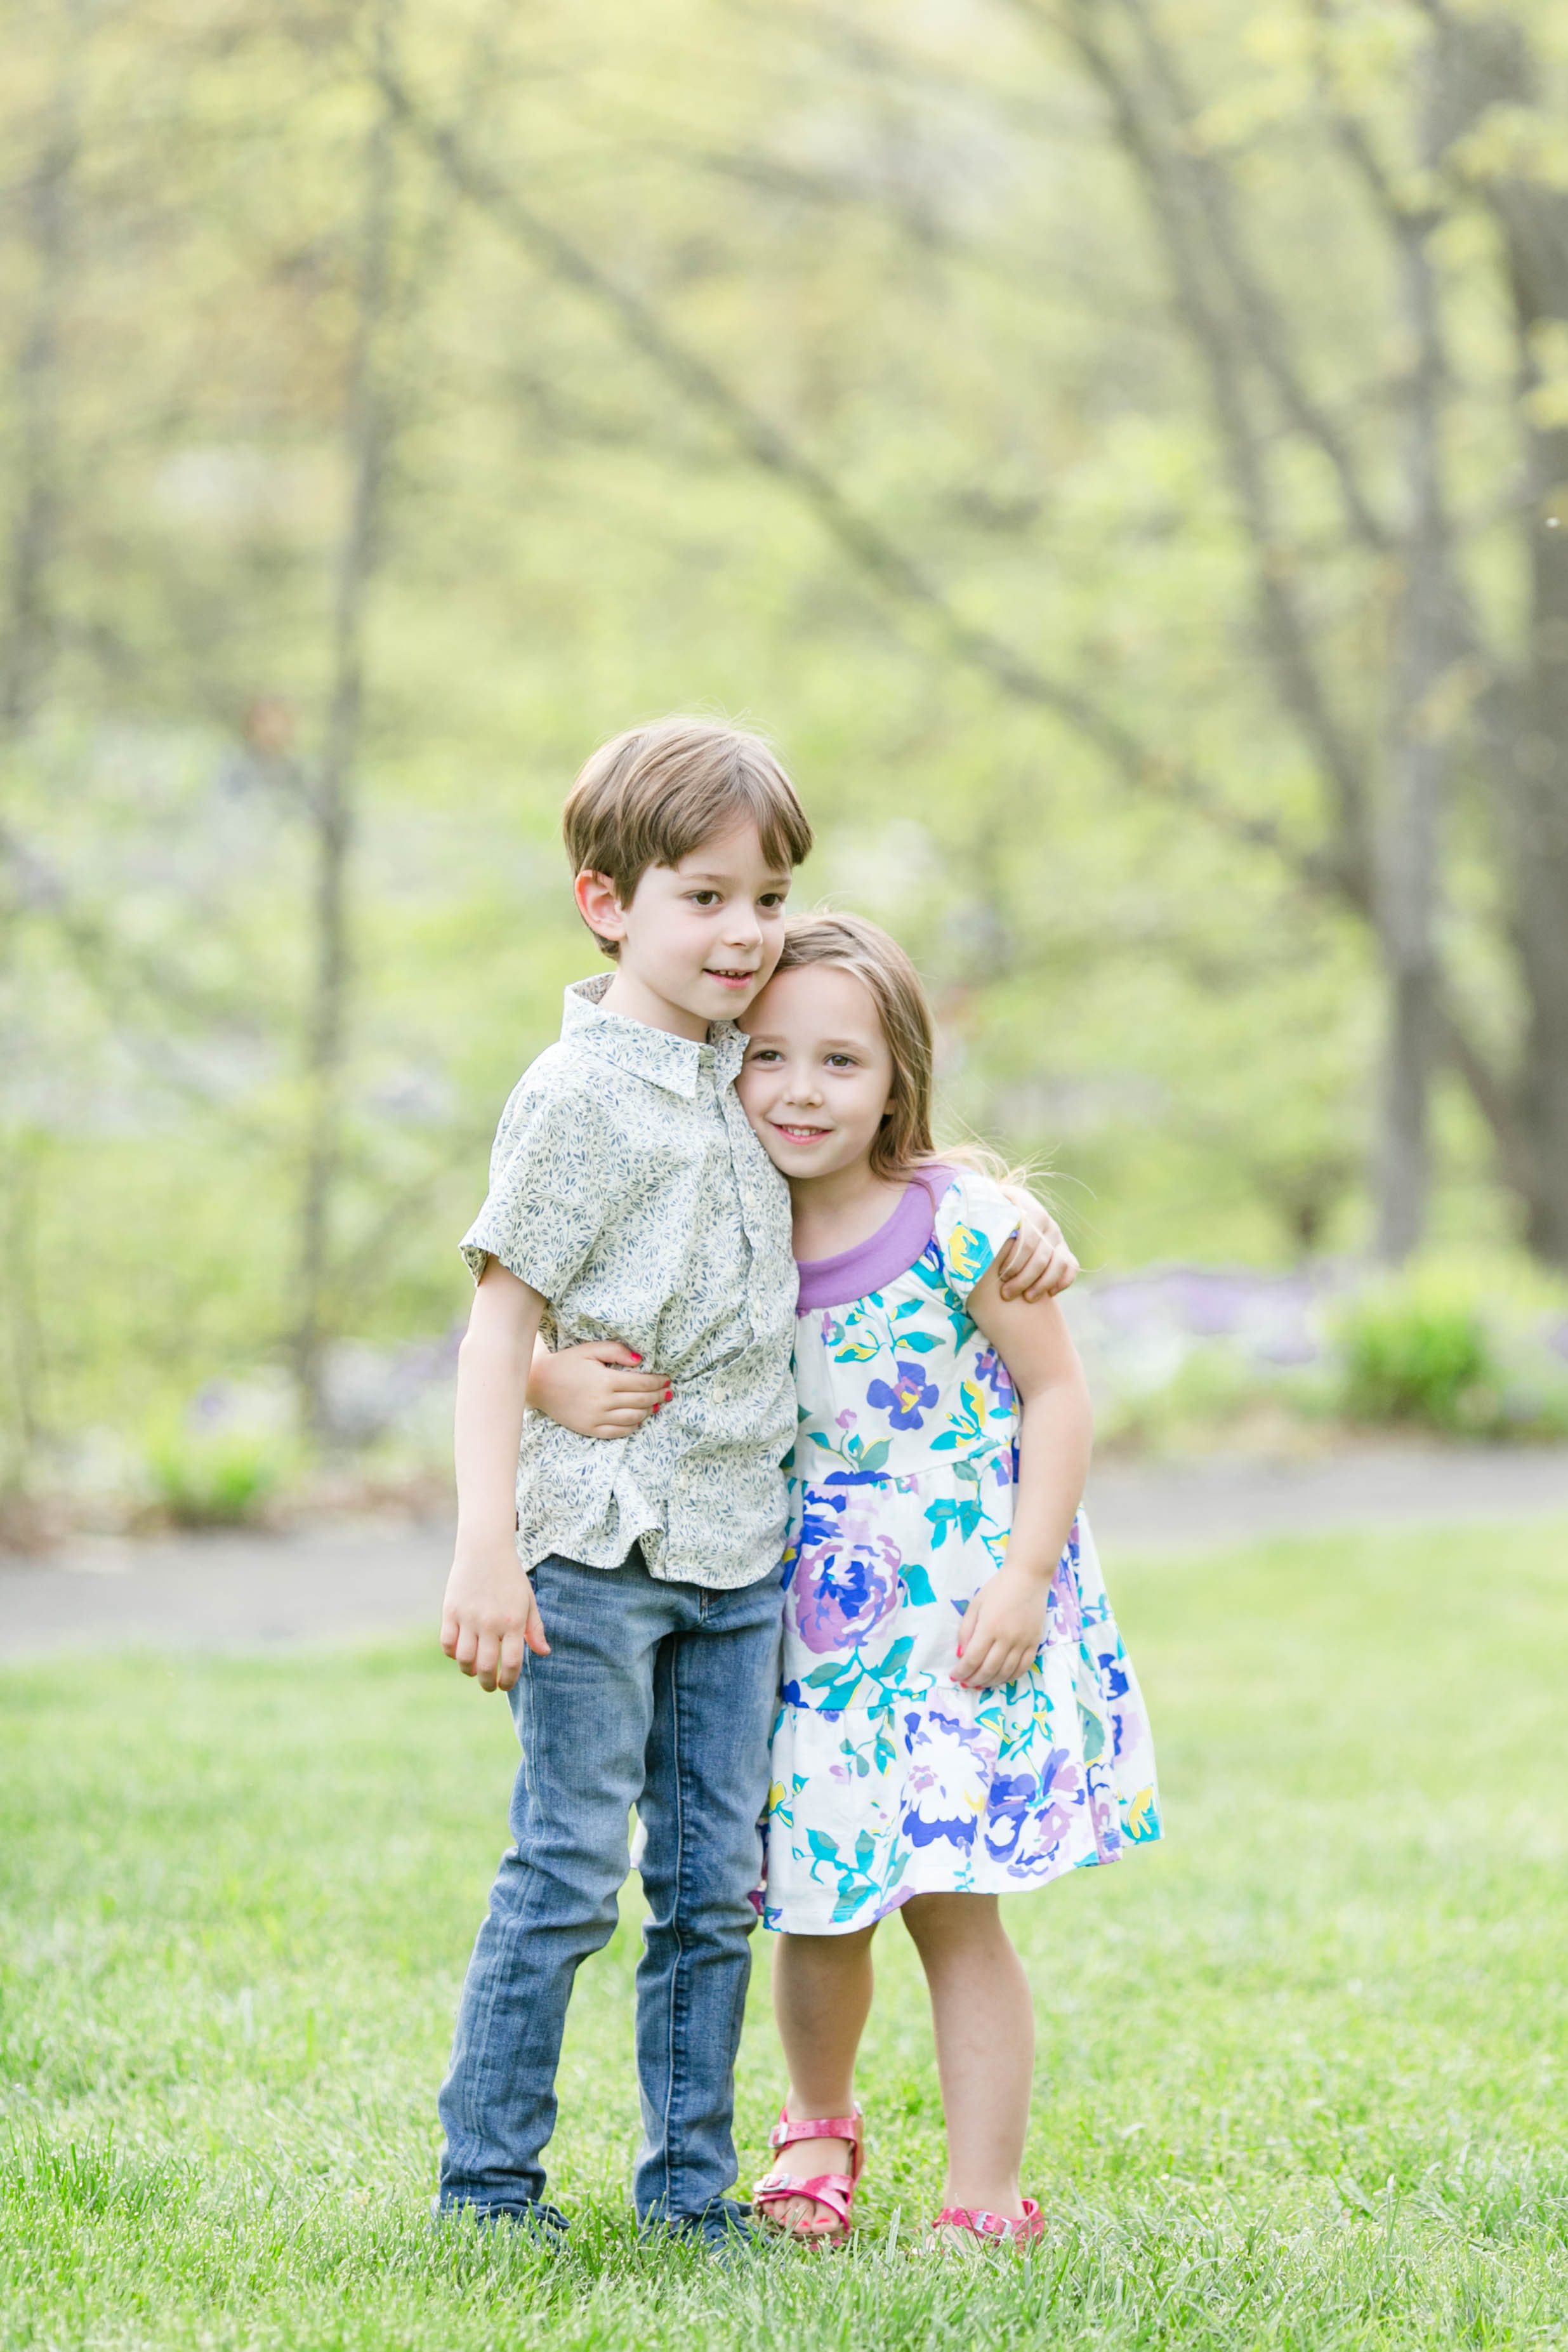 East Tennessee photography, Johnson City, Tri Cities, Jonesborough, family session, spring, engagement, wedding photographer, anniversary photos, portraits, bright and airy photography